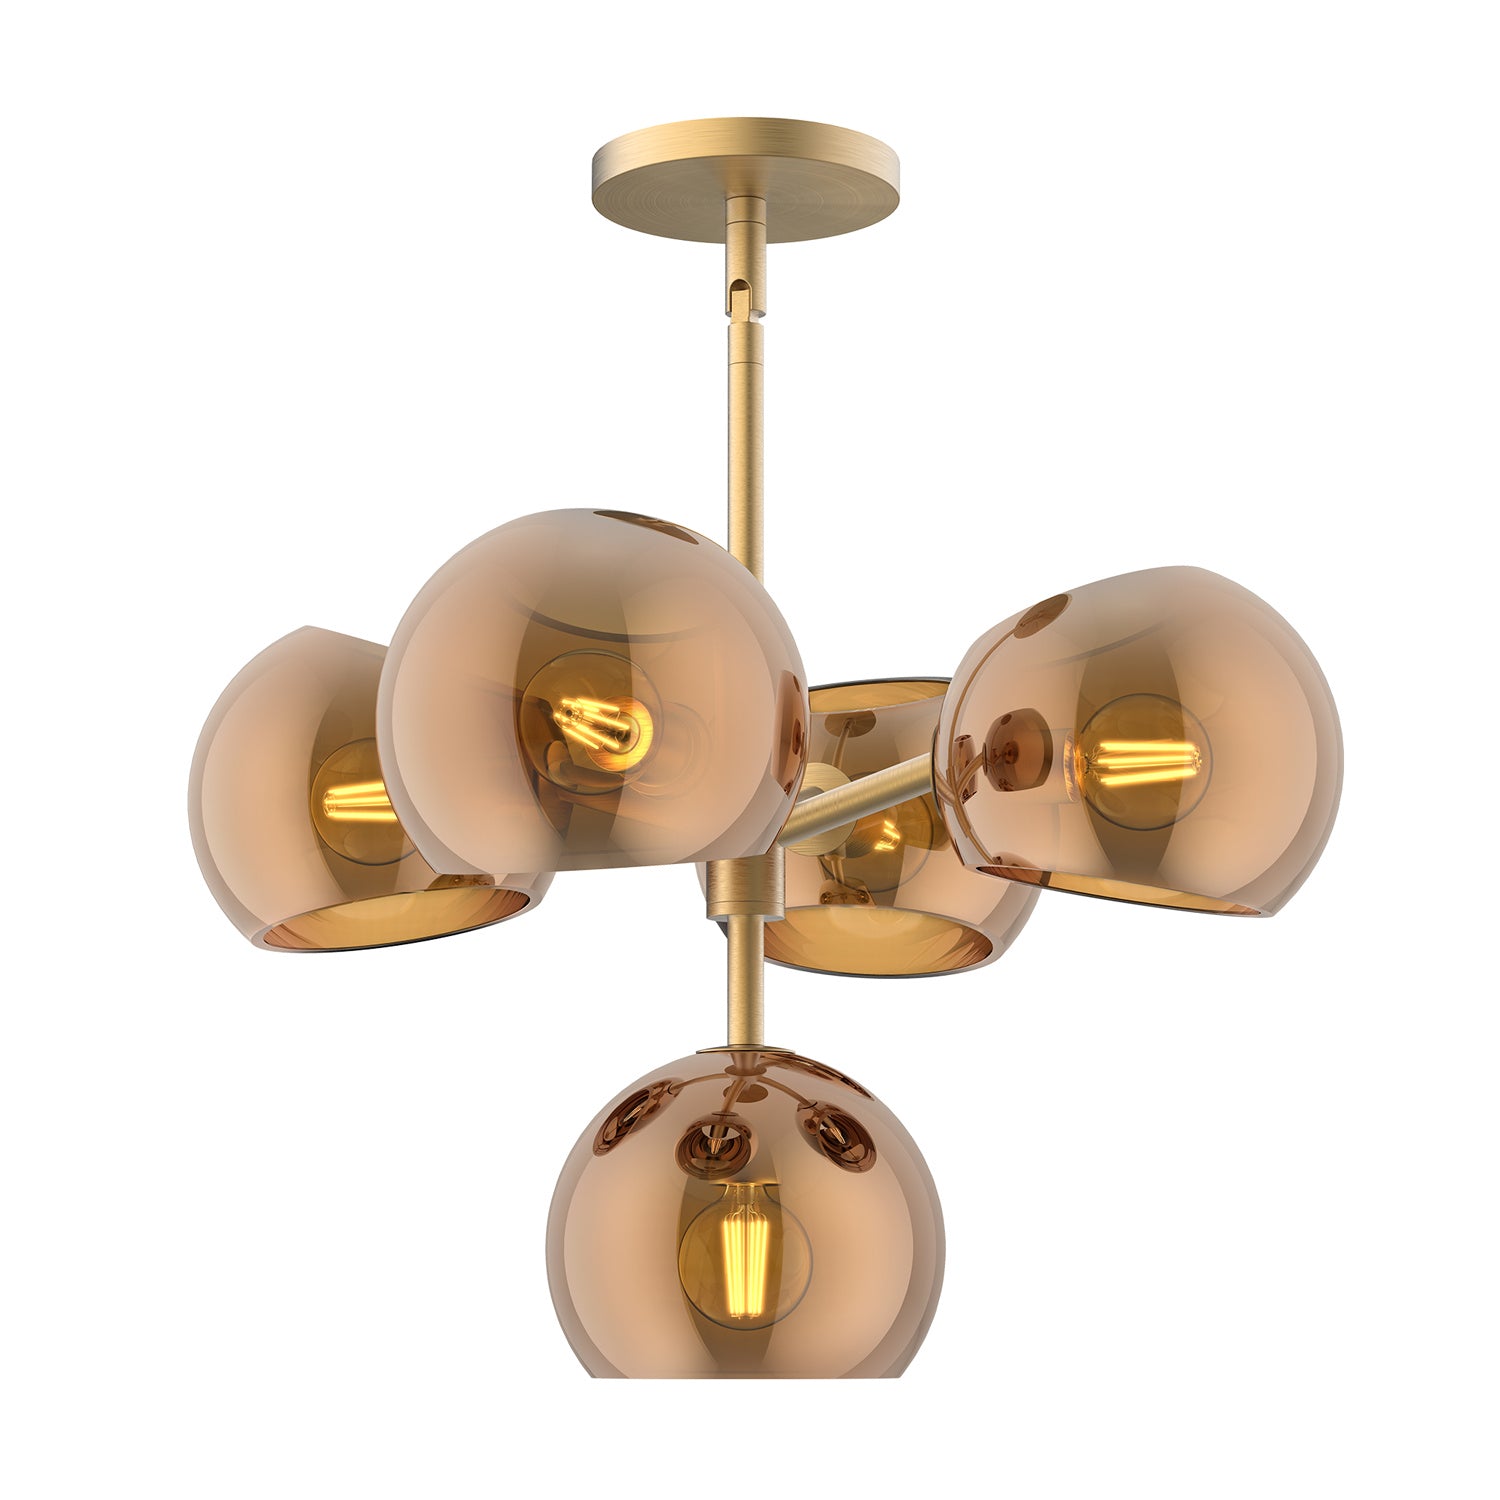 Alora Mood willow CH548518BGCP Chandelier Light - Brushed Gold/Copper Glass